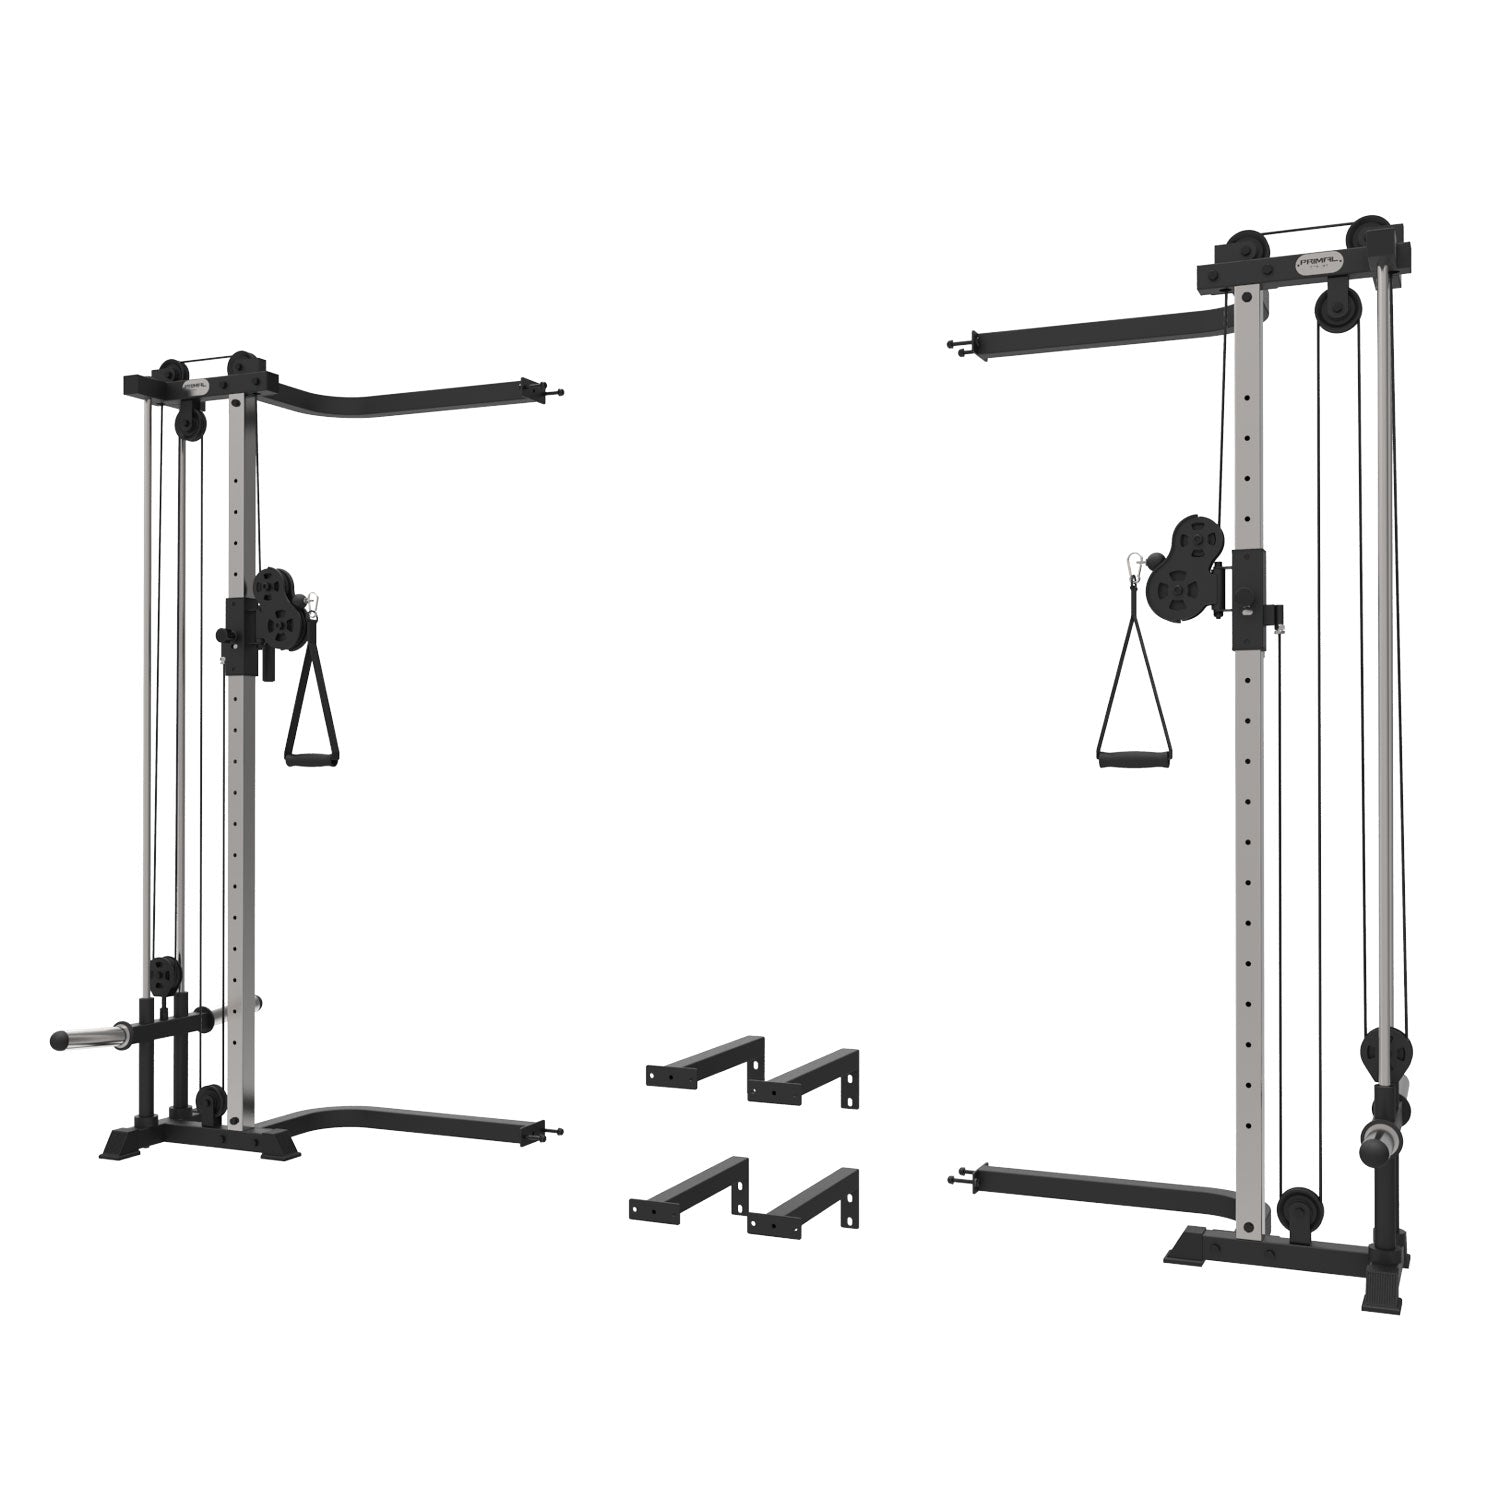 Wall Mounted Home Gym Single Cable Pulley Machine - Primal Strength